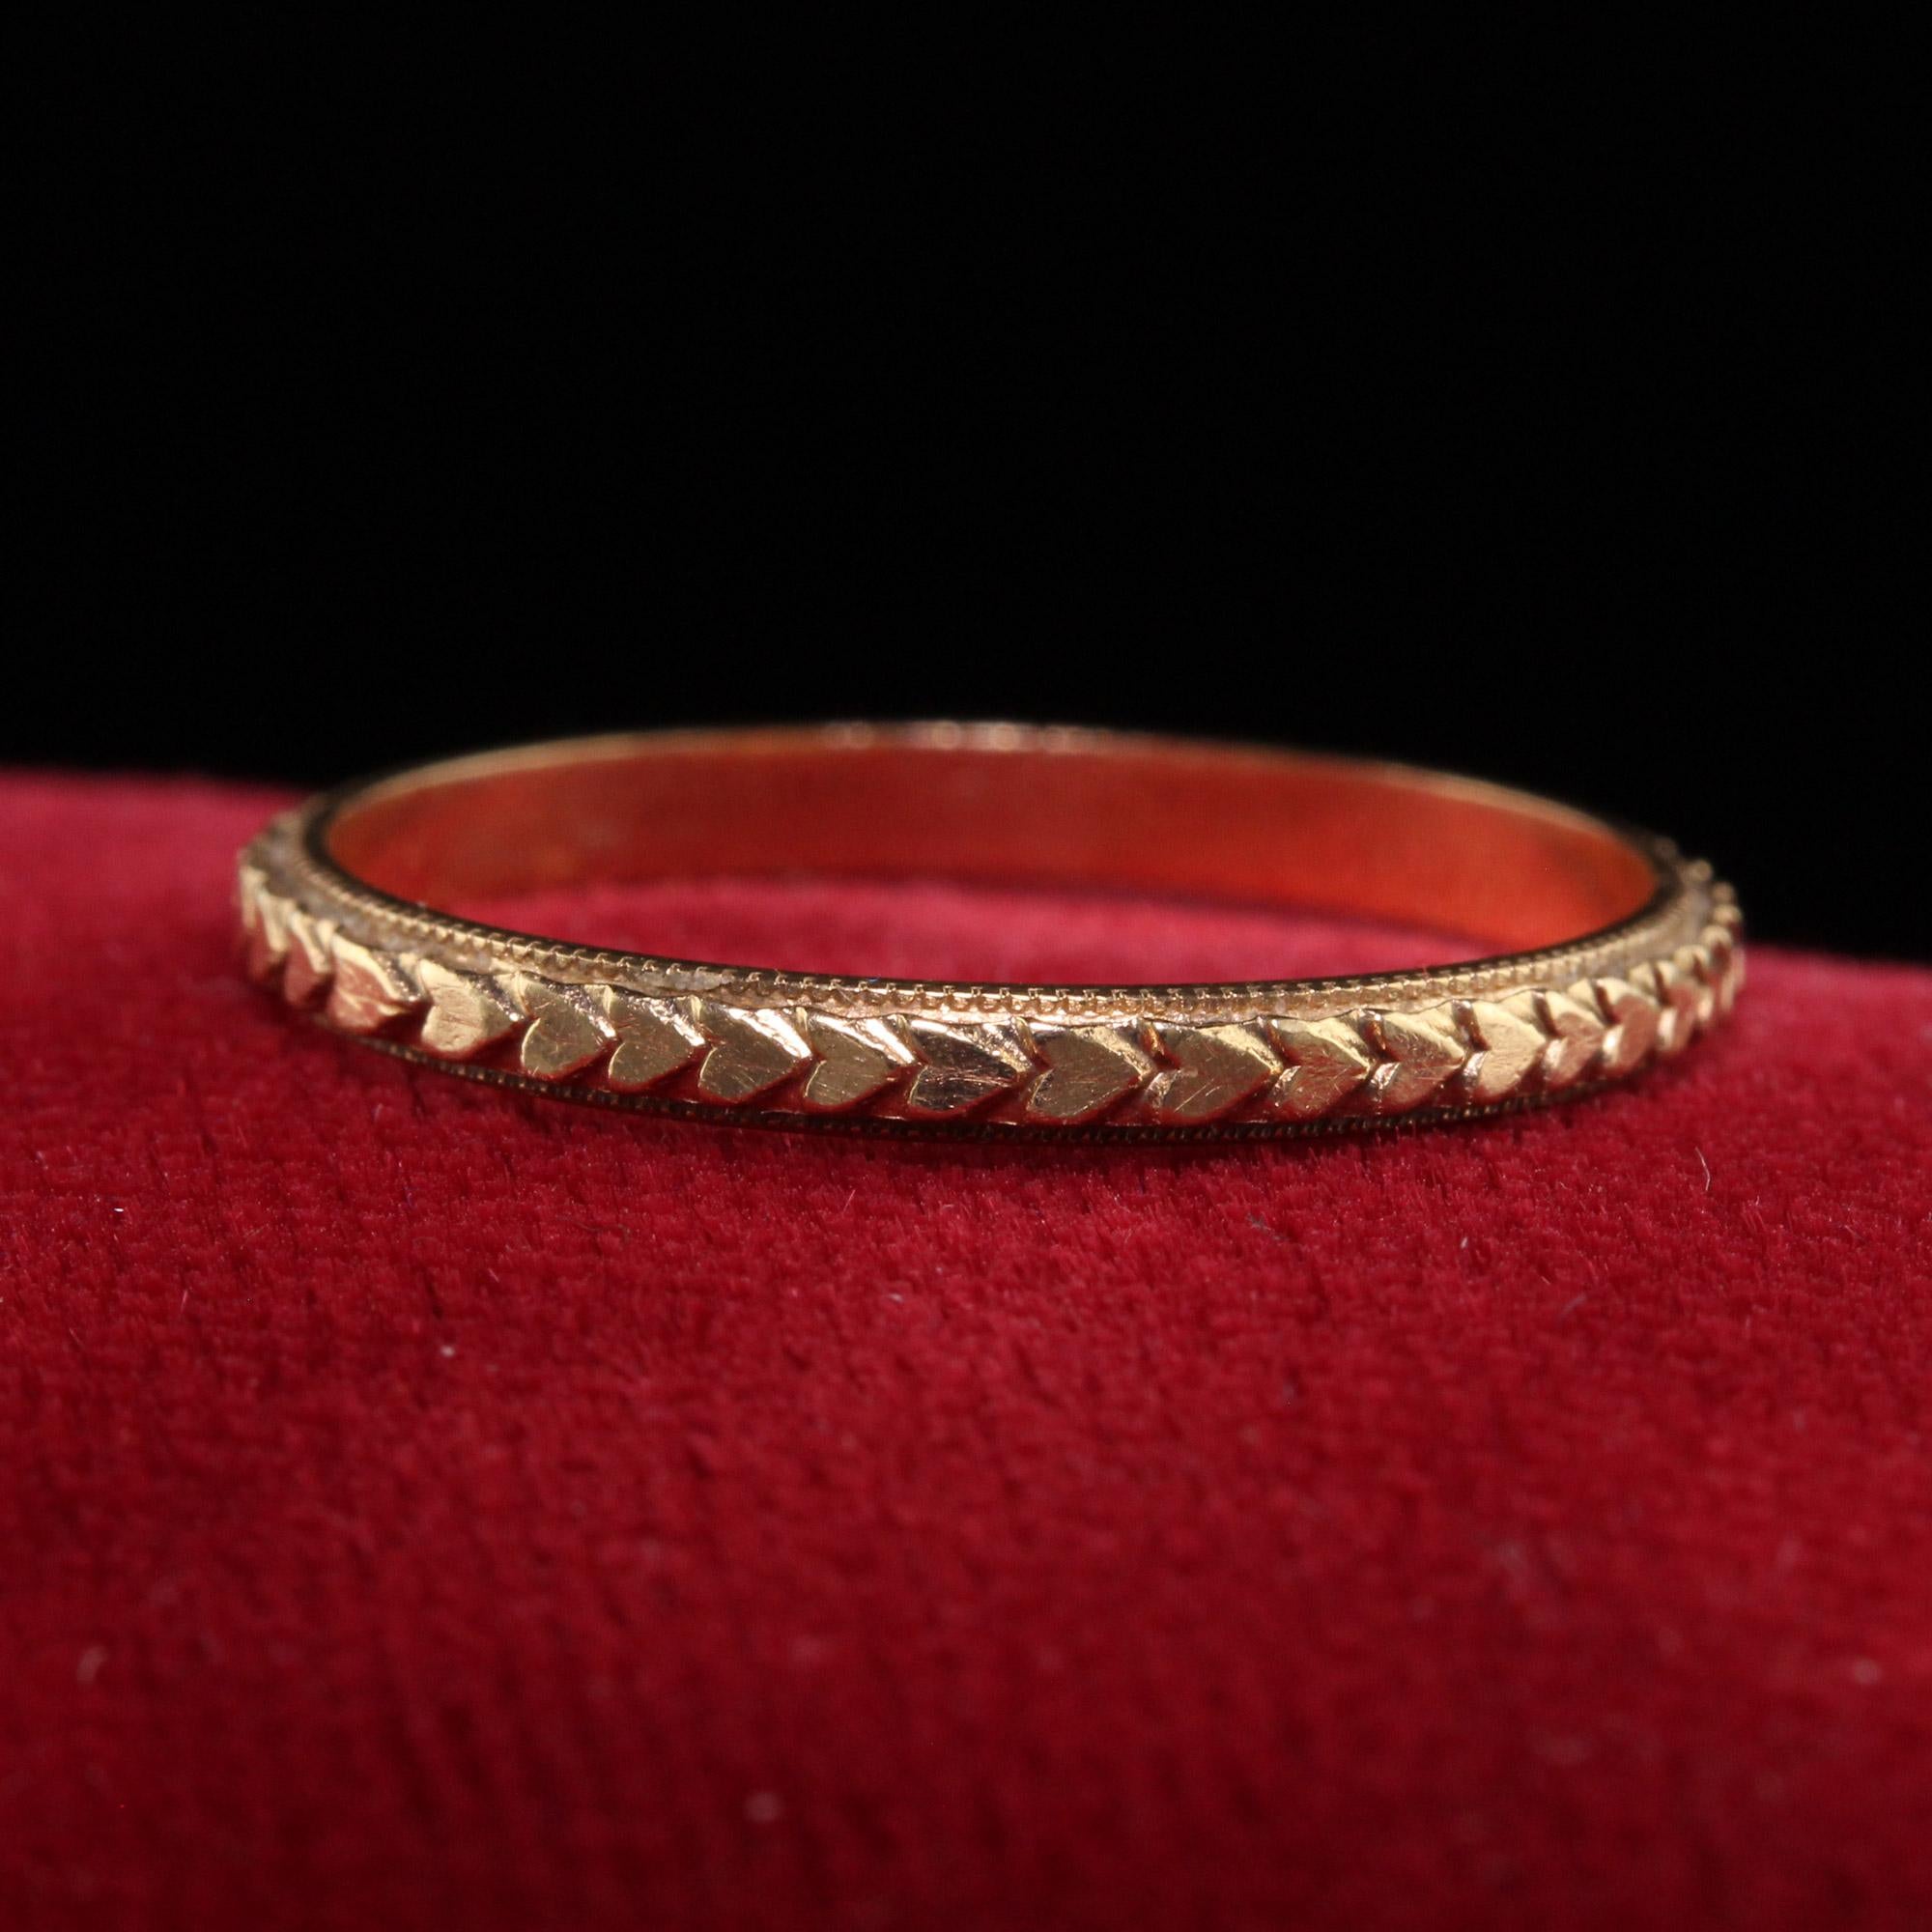 Beautiful Antique Art Deco 14K Yellow Gold Heart Engraved Wedding Band - Size 7. This beautiful wedding band is crafted in 14k yellow gold. The ring is in incredible condition with crisp heart engravings going around the entire ring. The ring sits